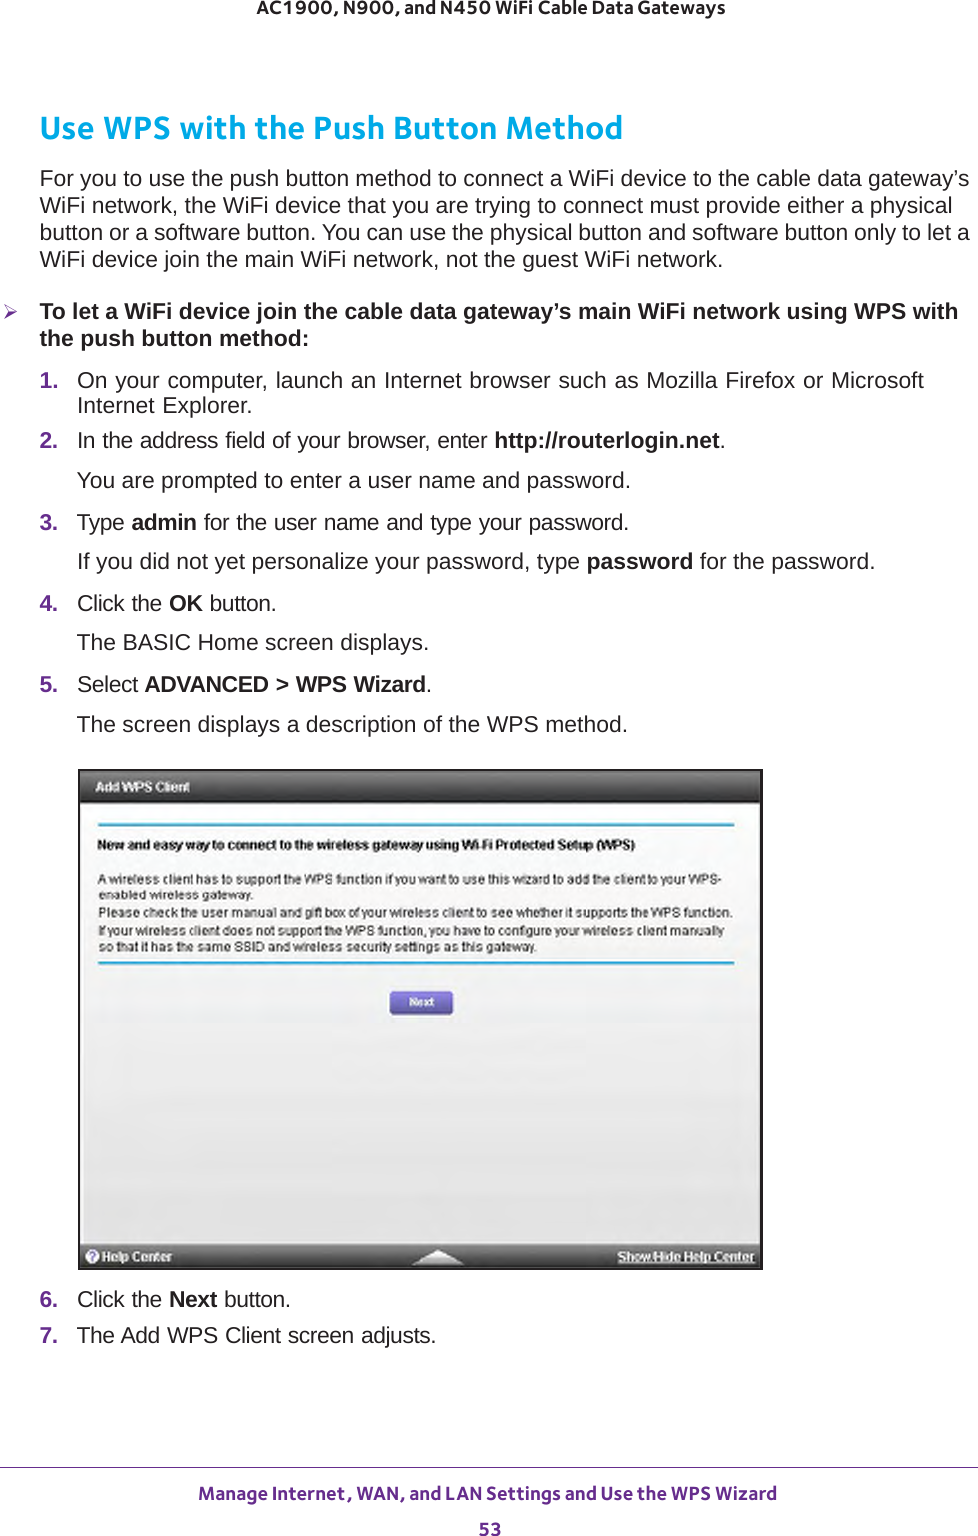 Manage Internet, WAN, and LAN Settings and Use the WPS Wizard 53 AC1900, N900, and N450 WiFi Cable Data GatewaysUse WPS with the Push Button MethodFor you to use the push button method to connect a WiFi device to the cable data gateway’s WiFi network, the WiFi device that you are trying to connect must provide either a physical button or a software button. You can use the physical button and software button only to let a WiFi device join the main WiFi network, not the guest WiFi network.To let a WiFi device join the cable data gateway’s main WiFi network using WPS with the push button method:1.  On your computer, launch an Internet browser such as Mozilla Firefox or Microsoft Internet Explorer. 2.  In the address field of your browser, enter http://routerlogin.net.You are prompted to enter a user name and password.3.  Type admin for the user name and type your password.If you did not yet personalize your password, type password for the password.4.  Click the OK button. The BASIC Home screen displays.5.  Select ADVANCED &gt; WPS Wizard.The screen displays a description of the WPS method.6.  Click the Next button.7.  The Add WPS Client screen adjusts.